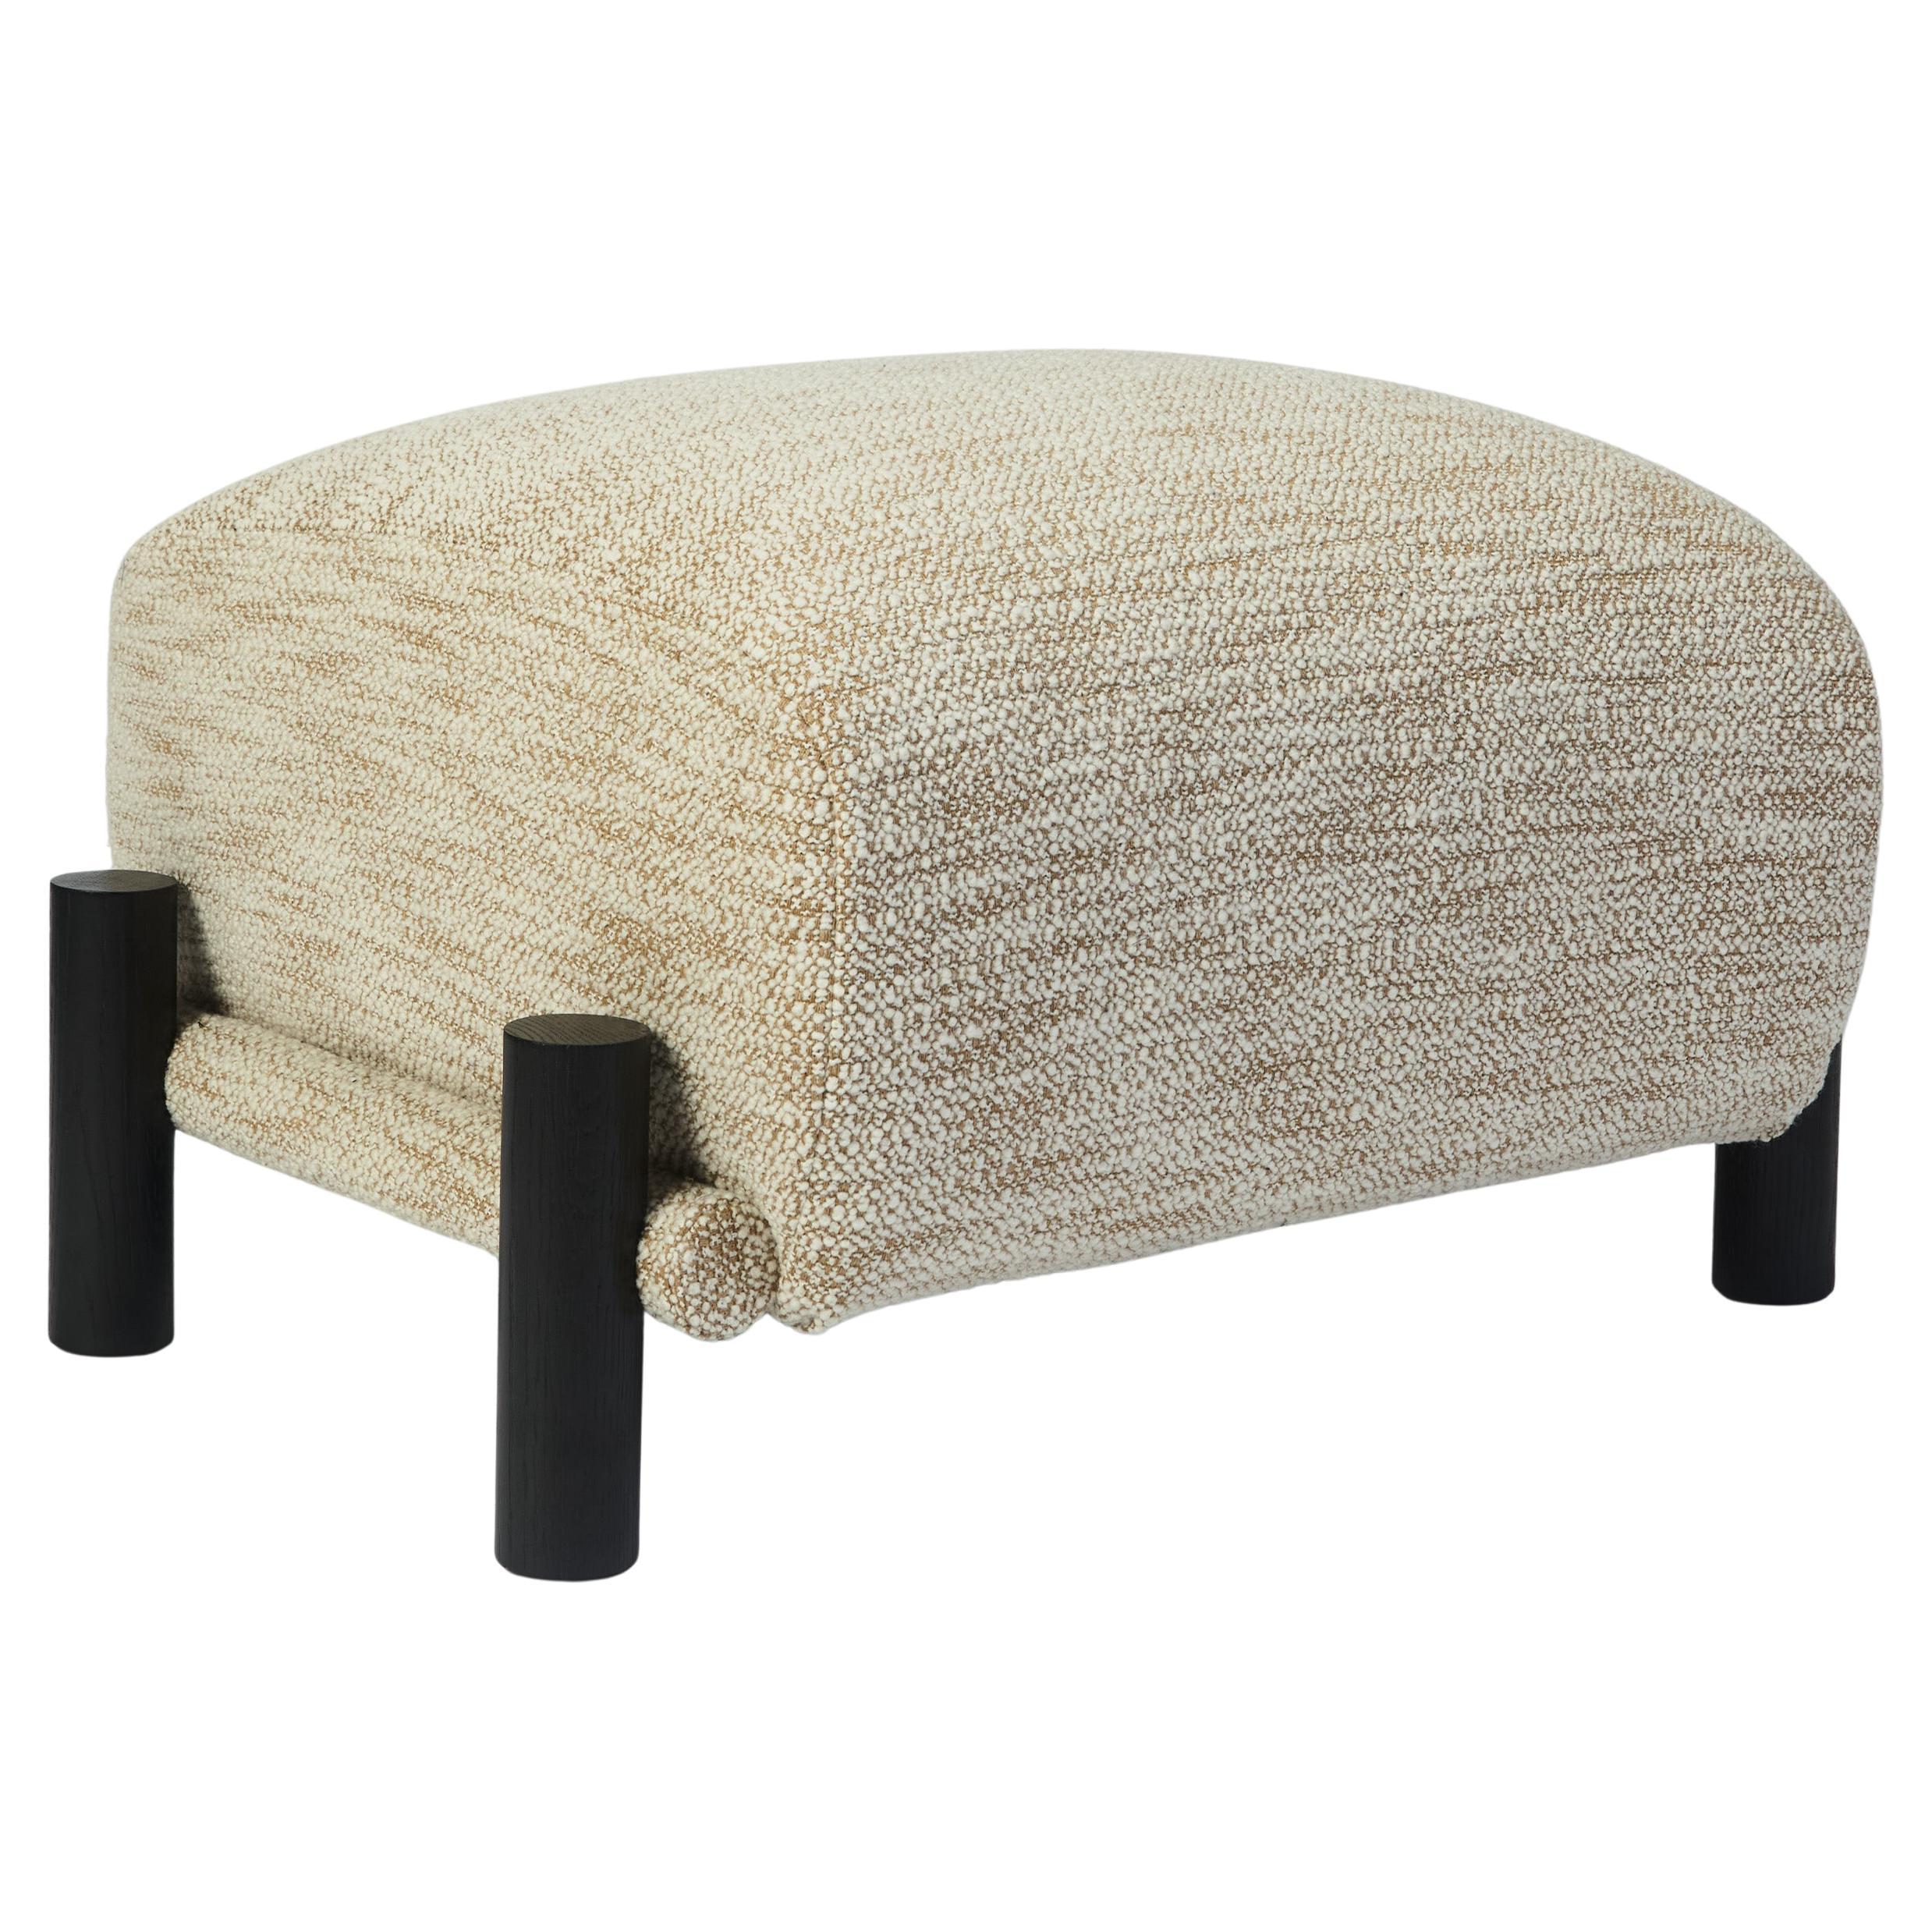 Ginga XL Footstool in Black Oak, Handcrafted in Portugal by Duistt